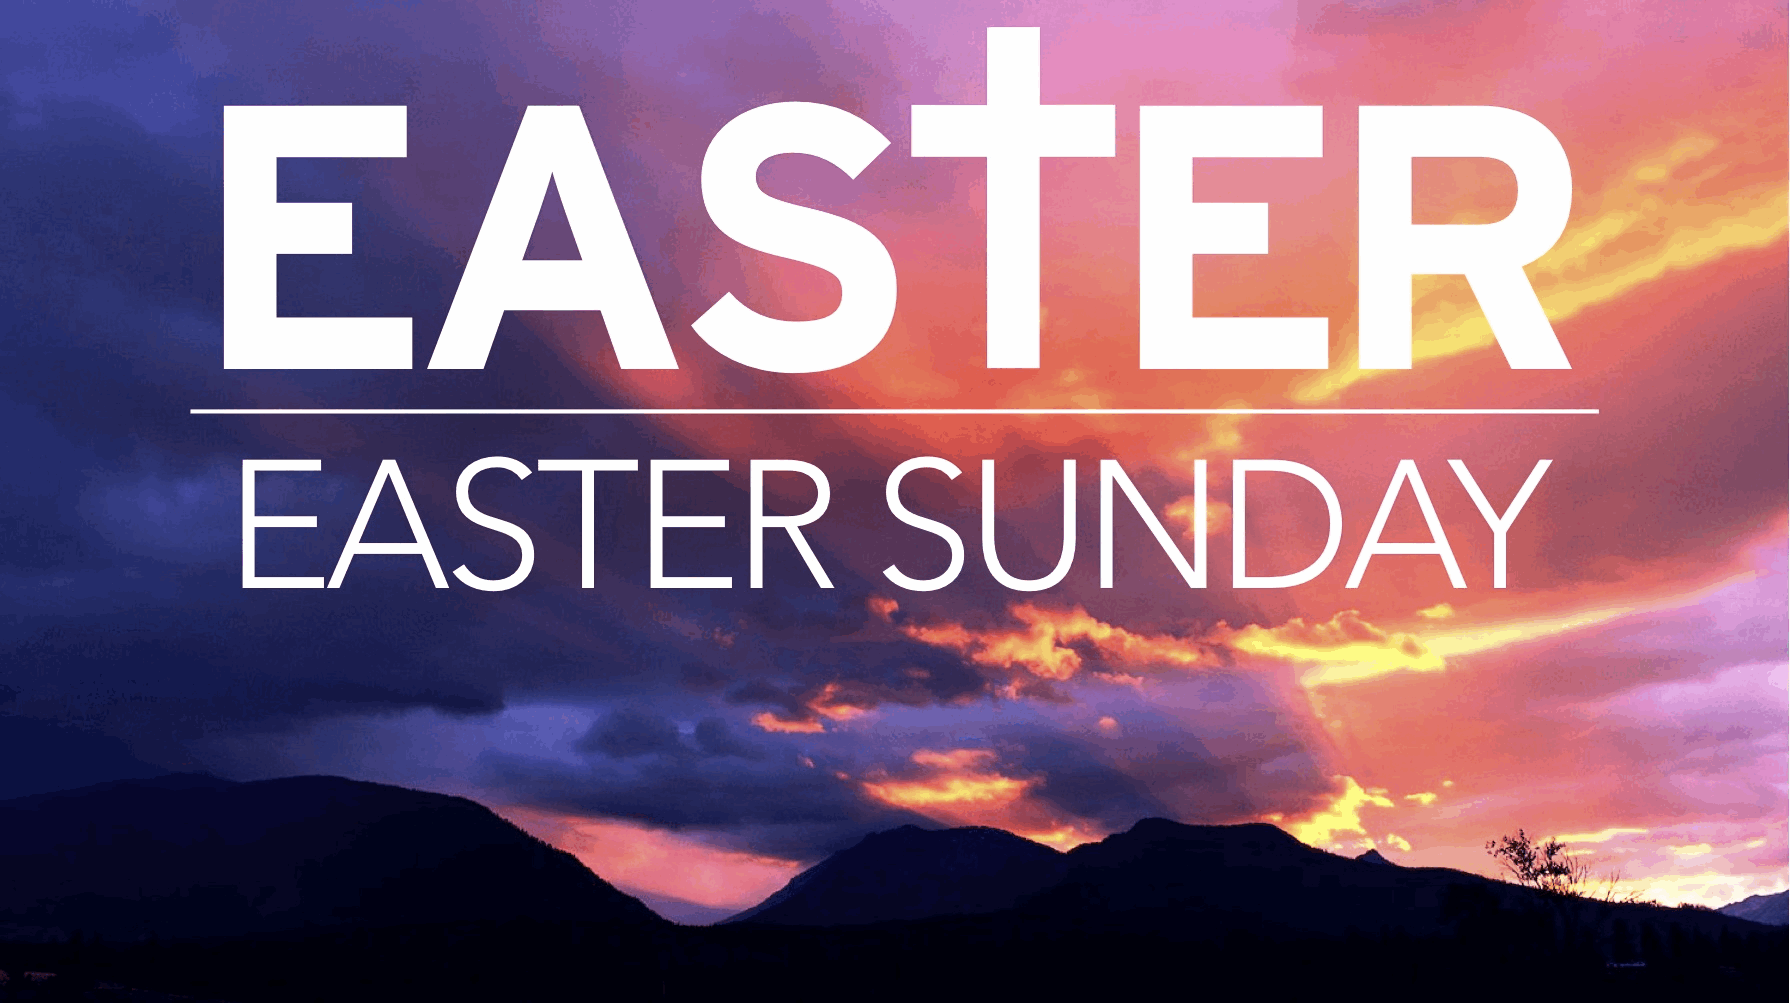 Easter Events & Services in Katy, Texas - Katy Texas